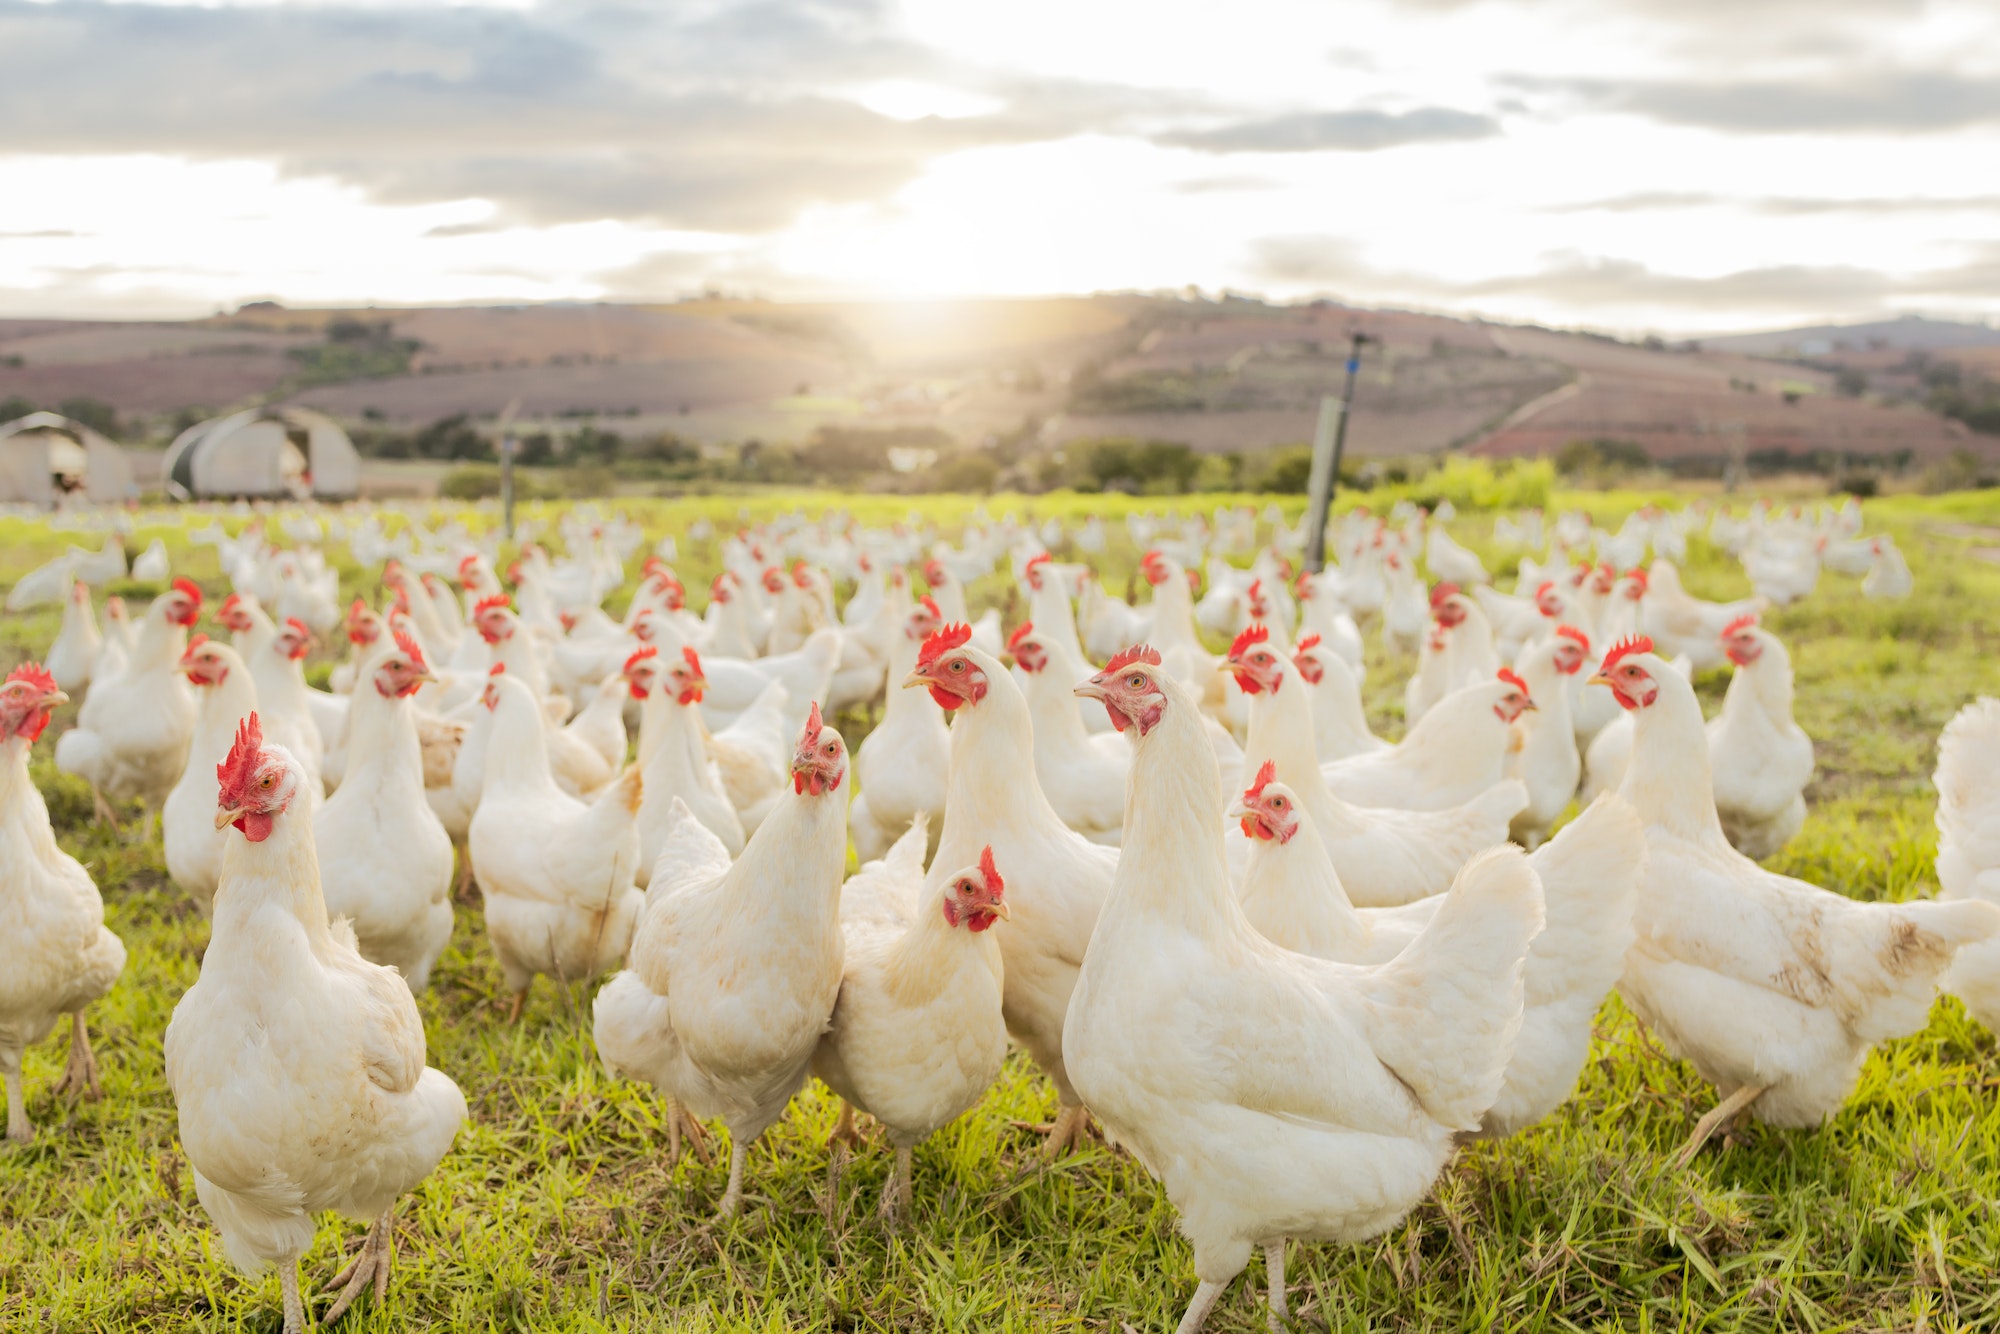 Farm, sustainability and chicken flock on farm for organic, poultry and livestock farming. Lens fla